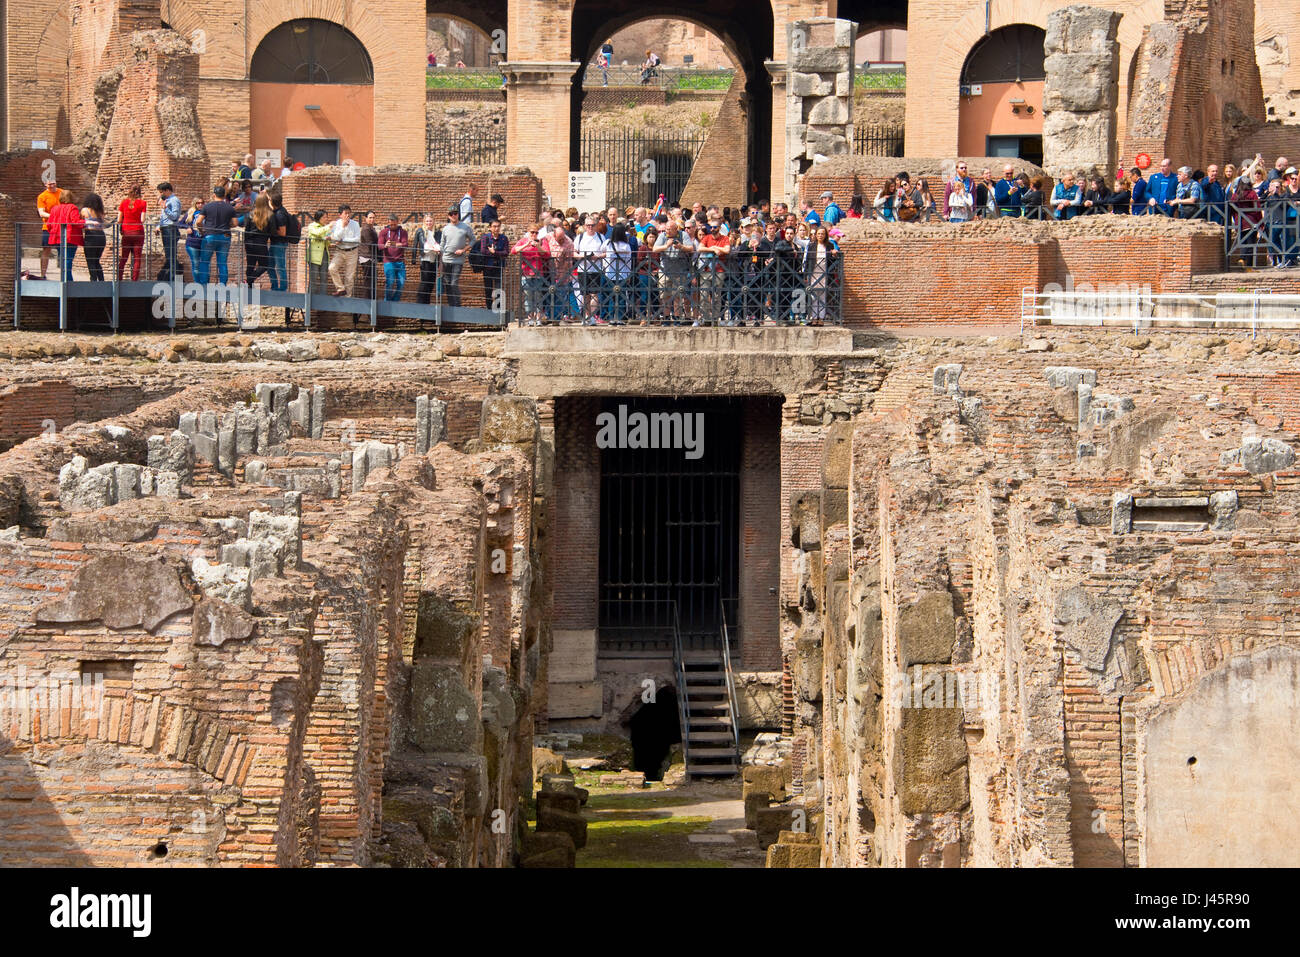 An interior view of the amphitheatre inside the Colosseum with tourists visitors on a sunny day taken from ground level. Stock Photo